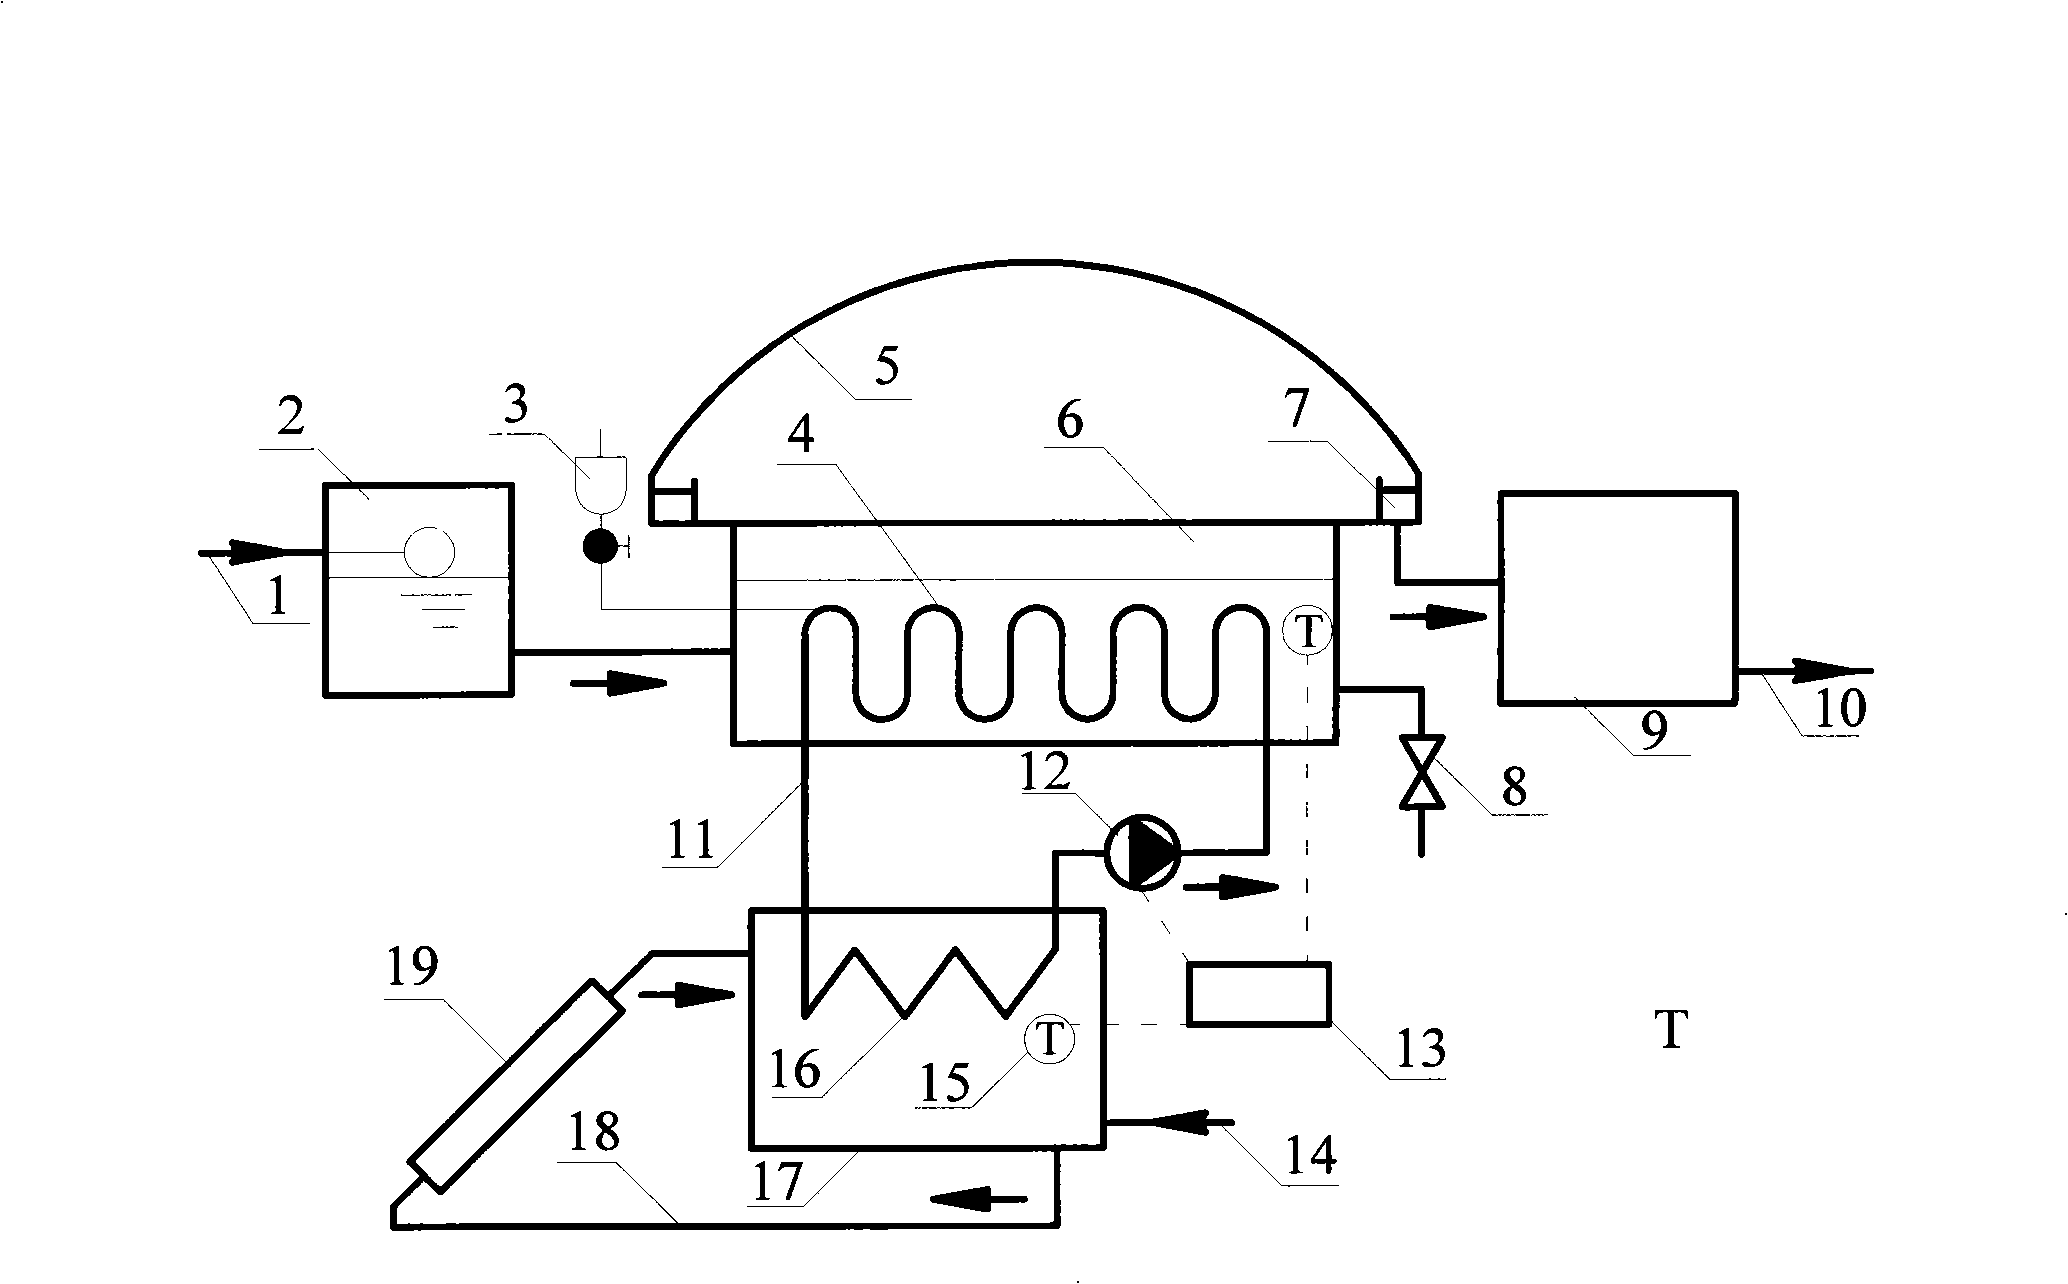 Solar heating evaporation treatment process and apparatus for garbage